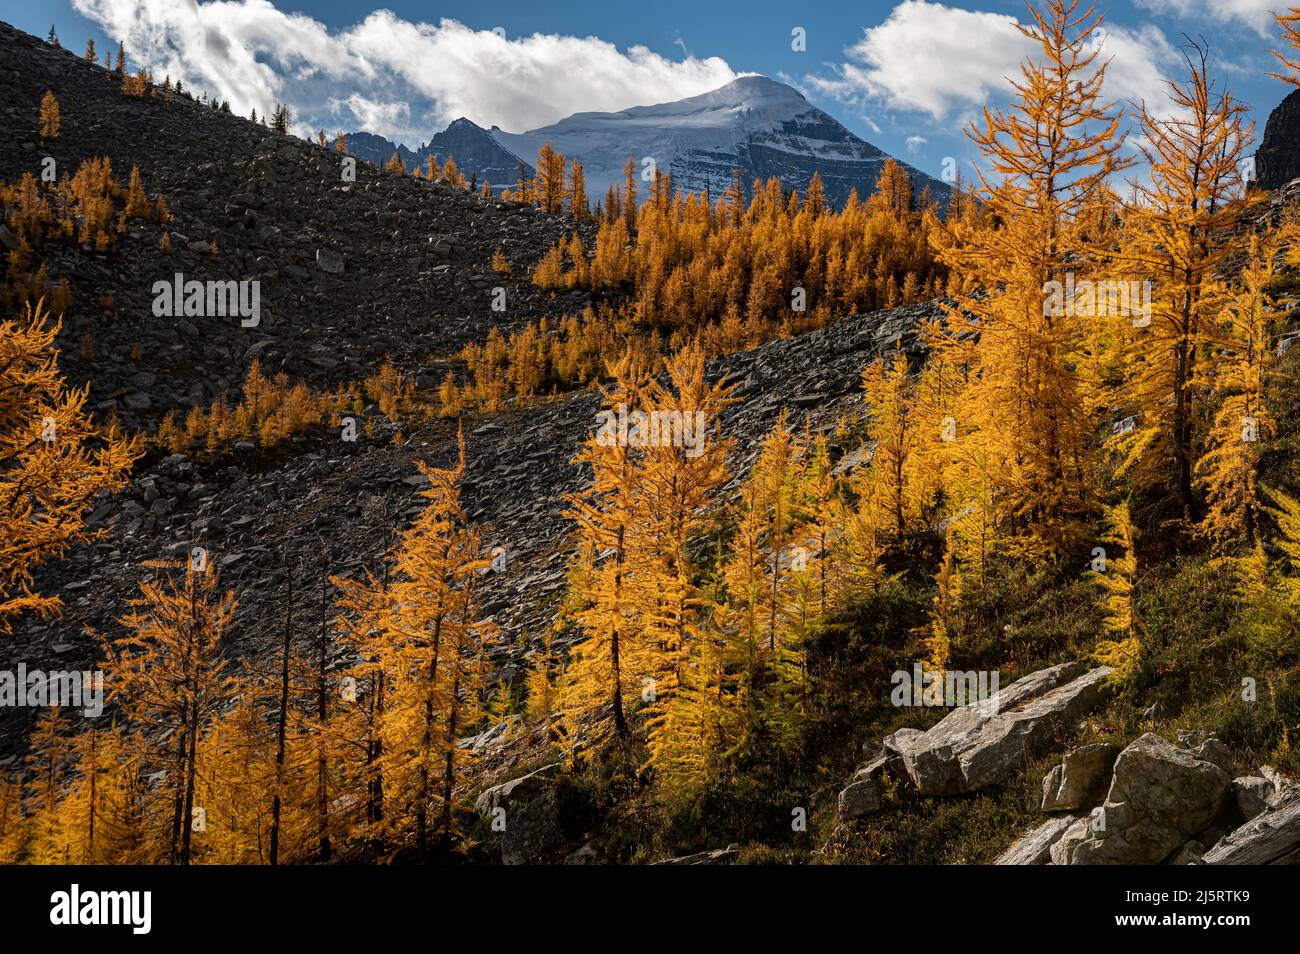 Larch trees (Larix decidua) with Mount Temple and Temple glacier behind, Saddle Mountain Trail, Banff National Park, Alberta, Canada, Stock Photo